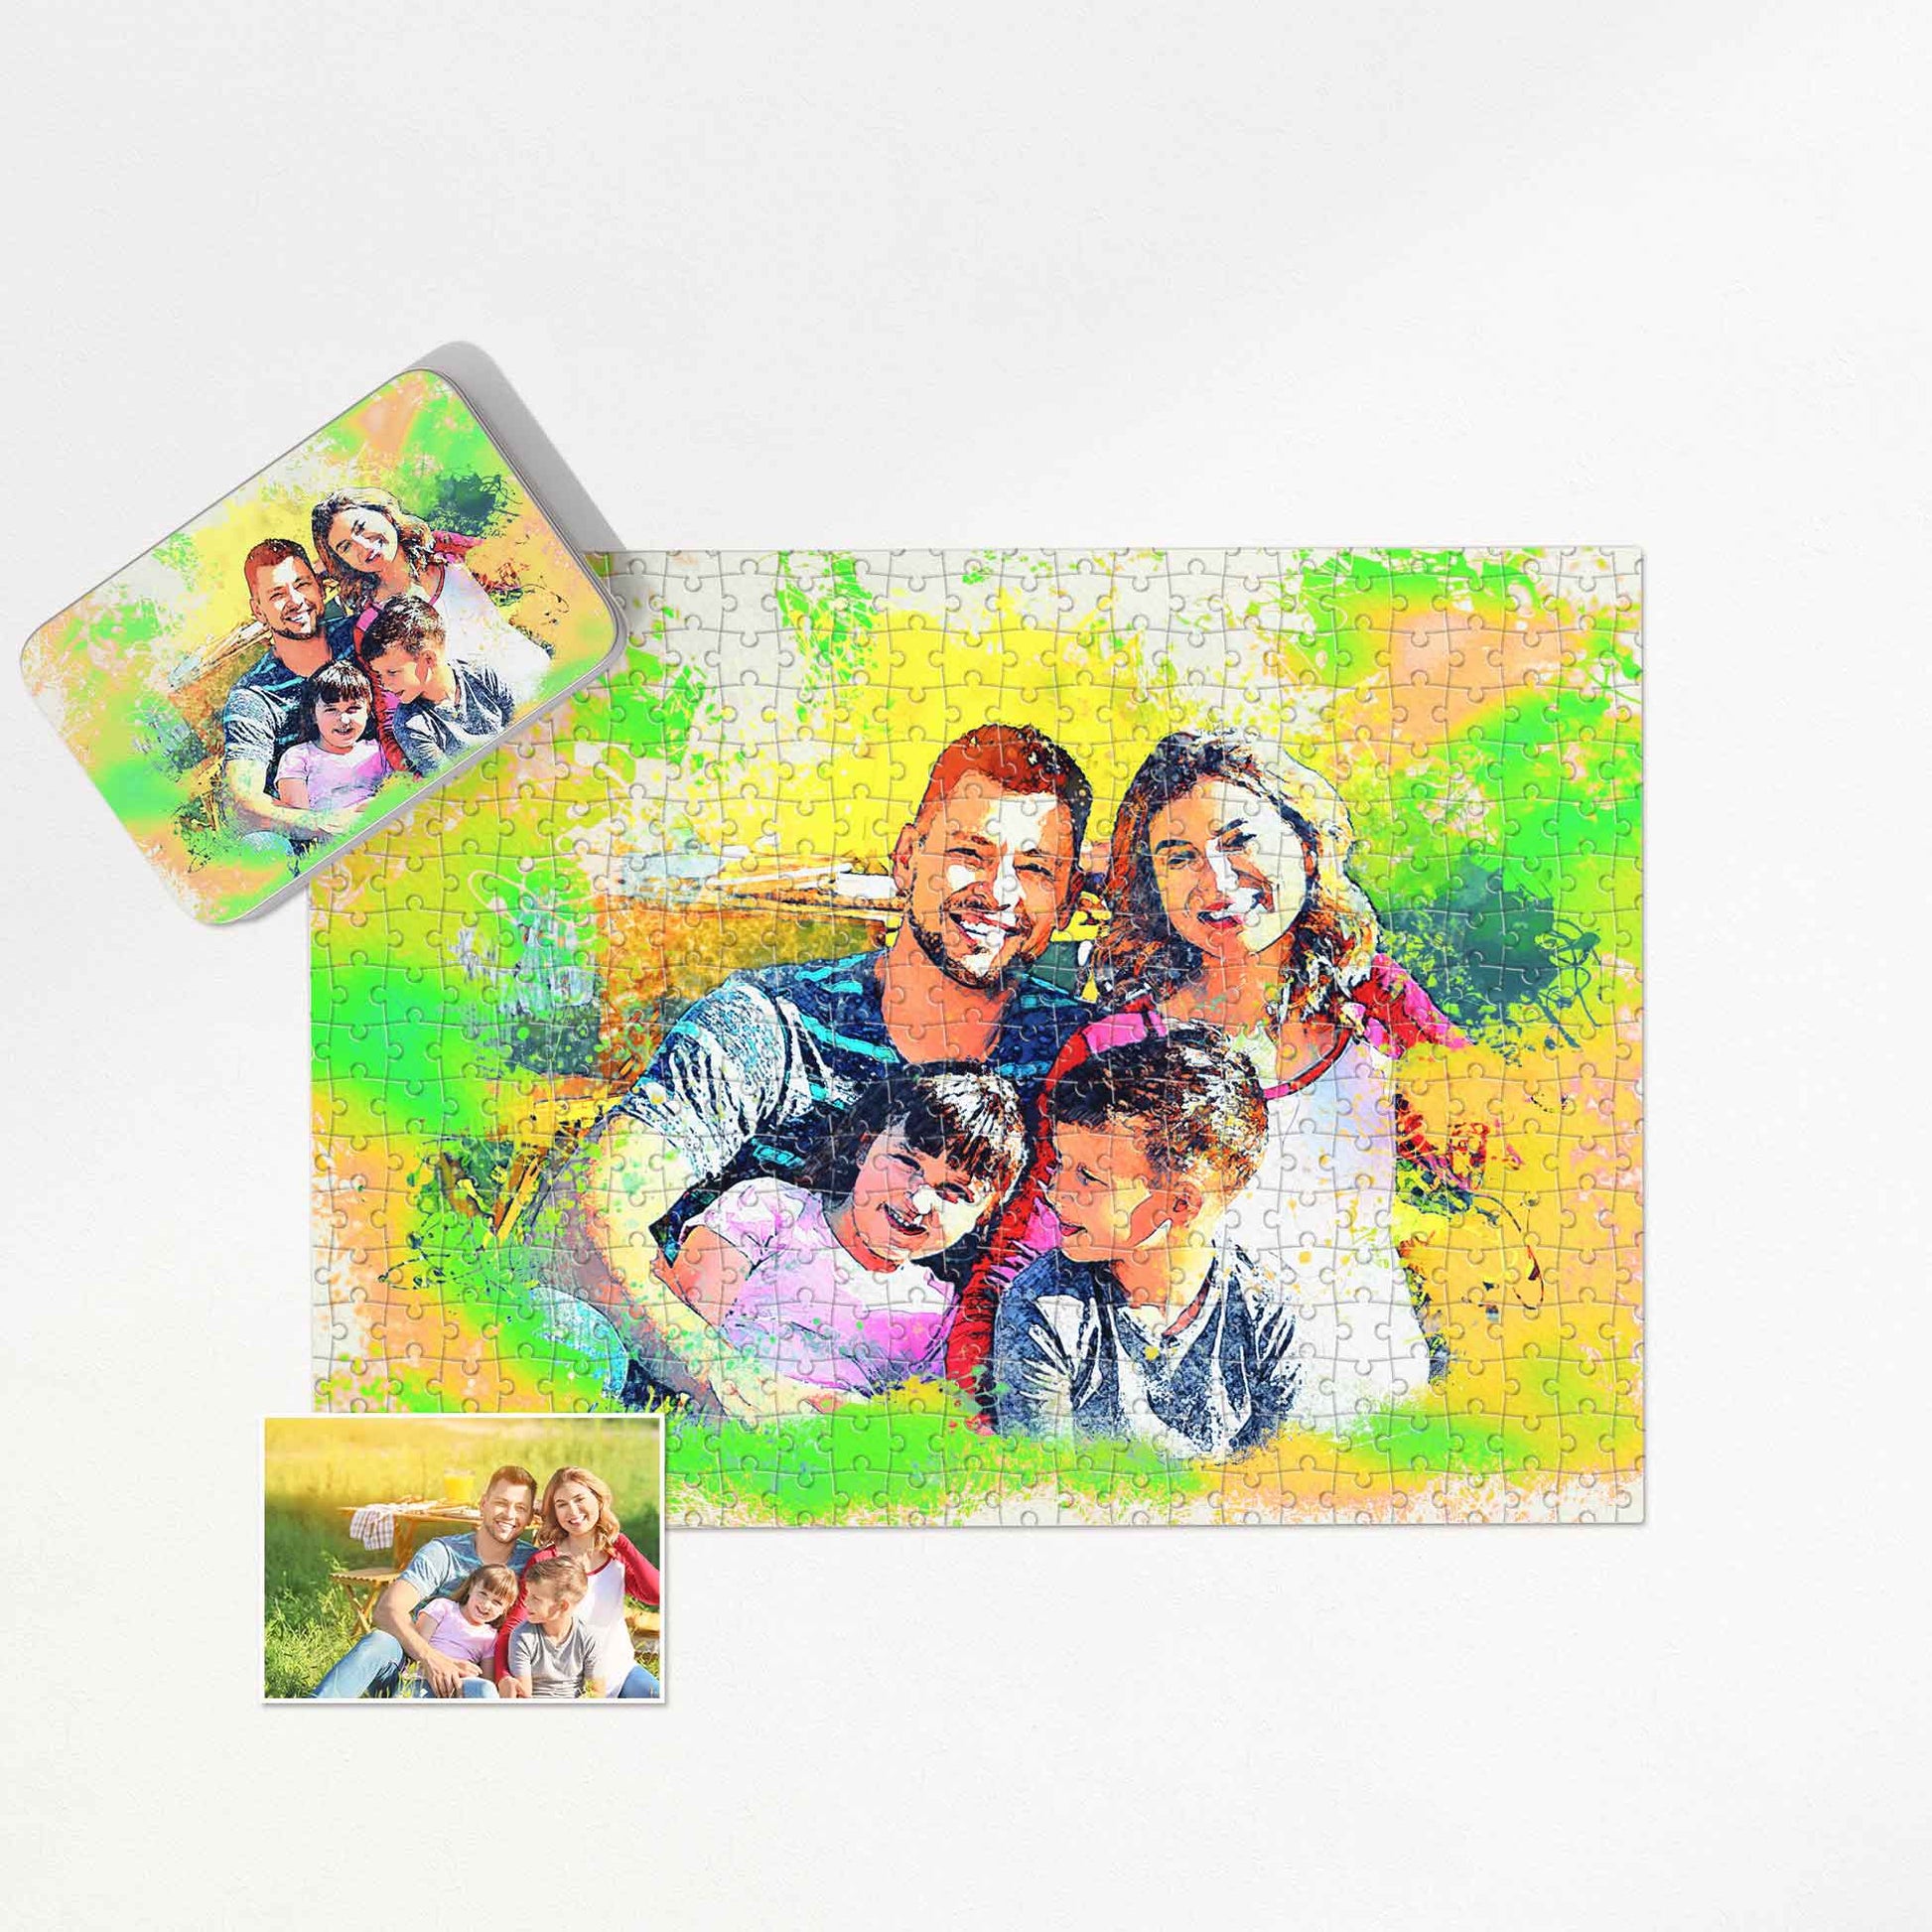 Looking for a fantastic gift? Our Personalised Watercolor Splash Jigsaw Puzzle, with its texture effect and vivid colors, is the perfect choice. Create lasting memories and share happiness with your loved ones. Handmade with love